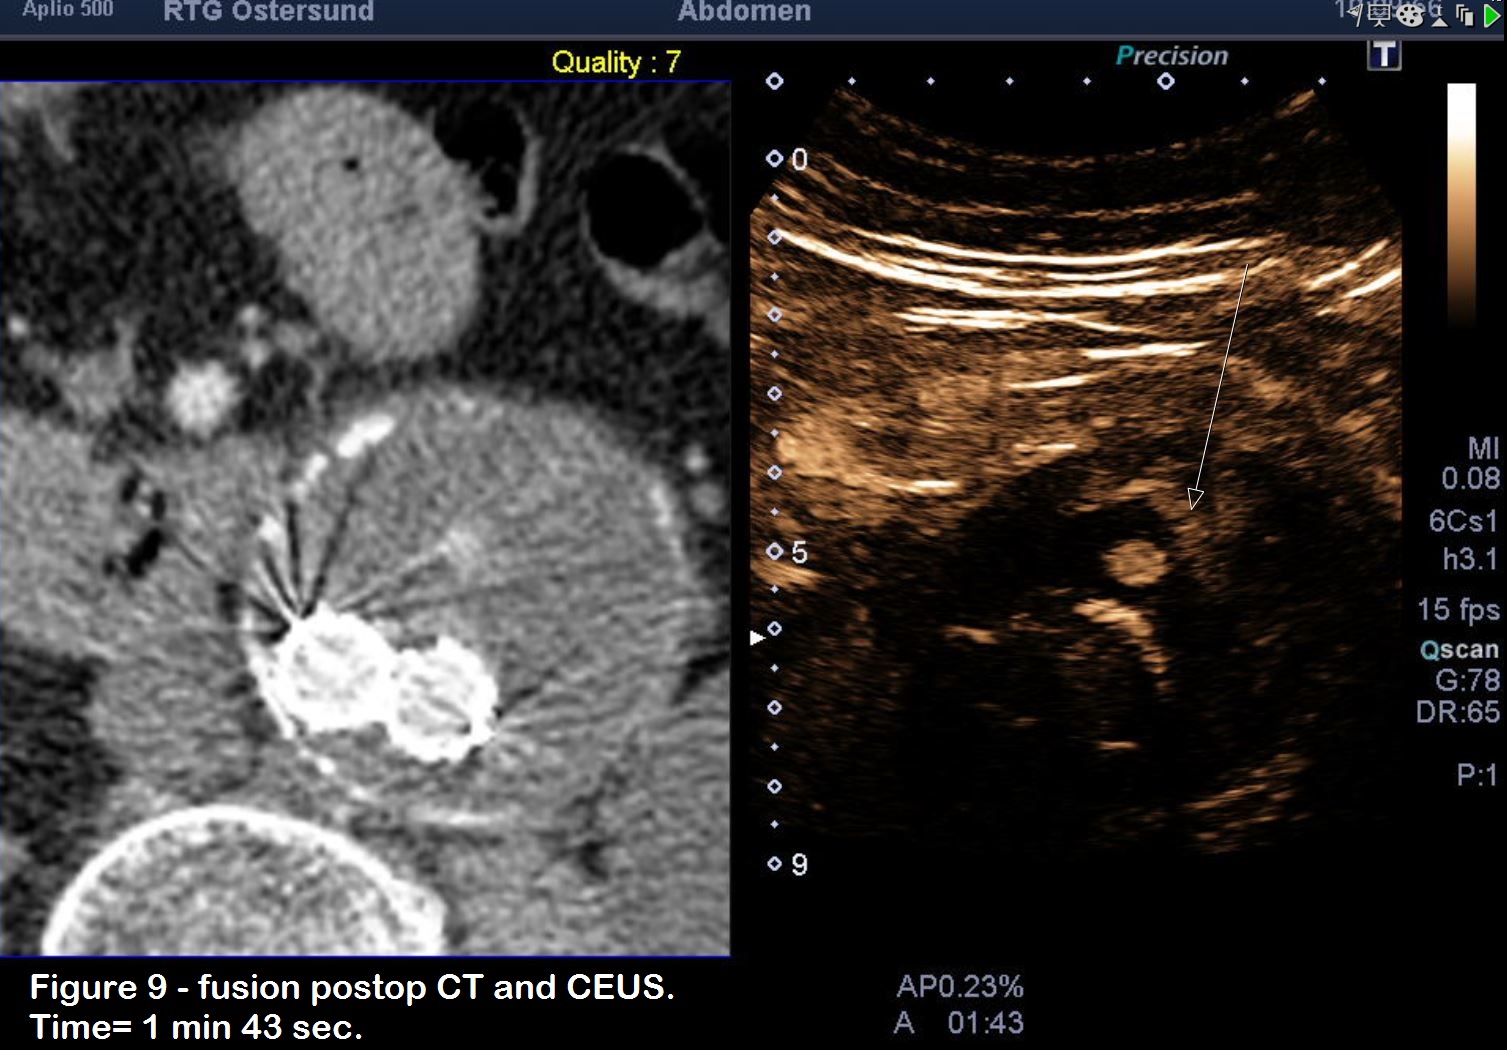 Post-EVAR control with CEUS and fusion-ultrasound </br> [Feb 2019]